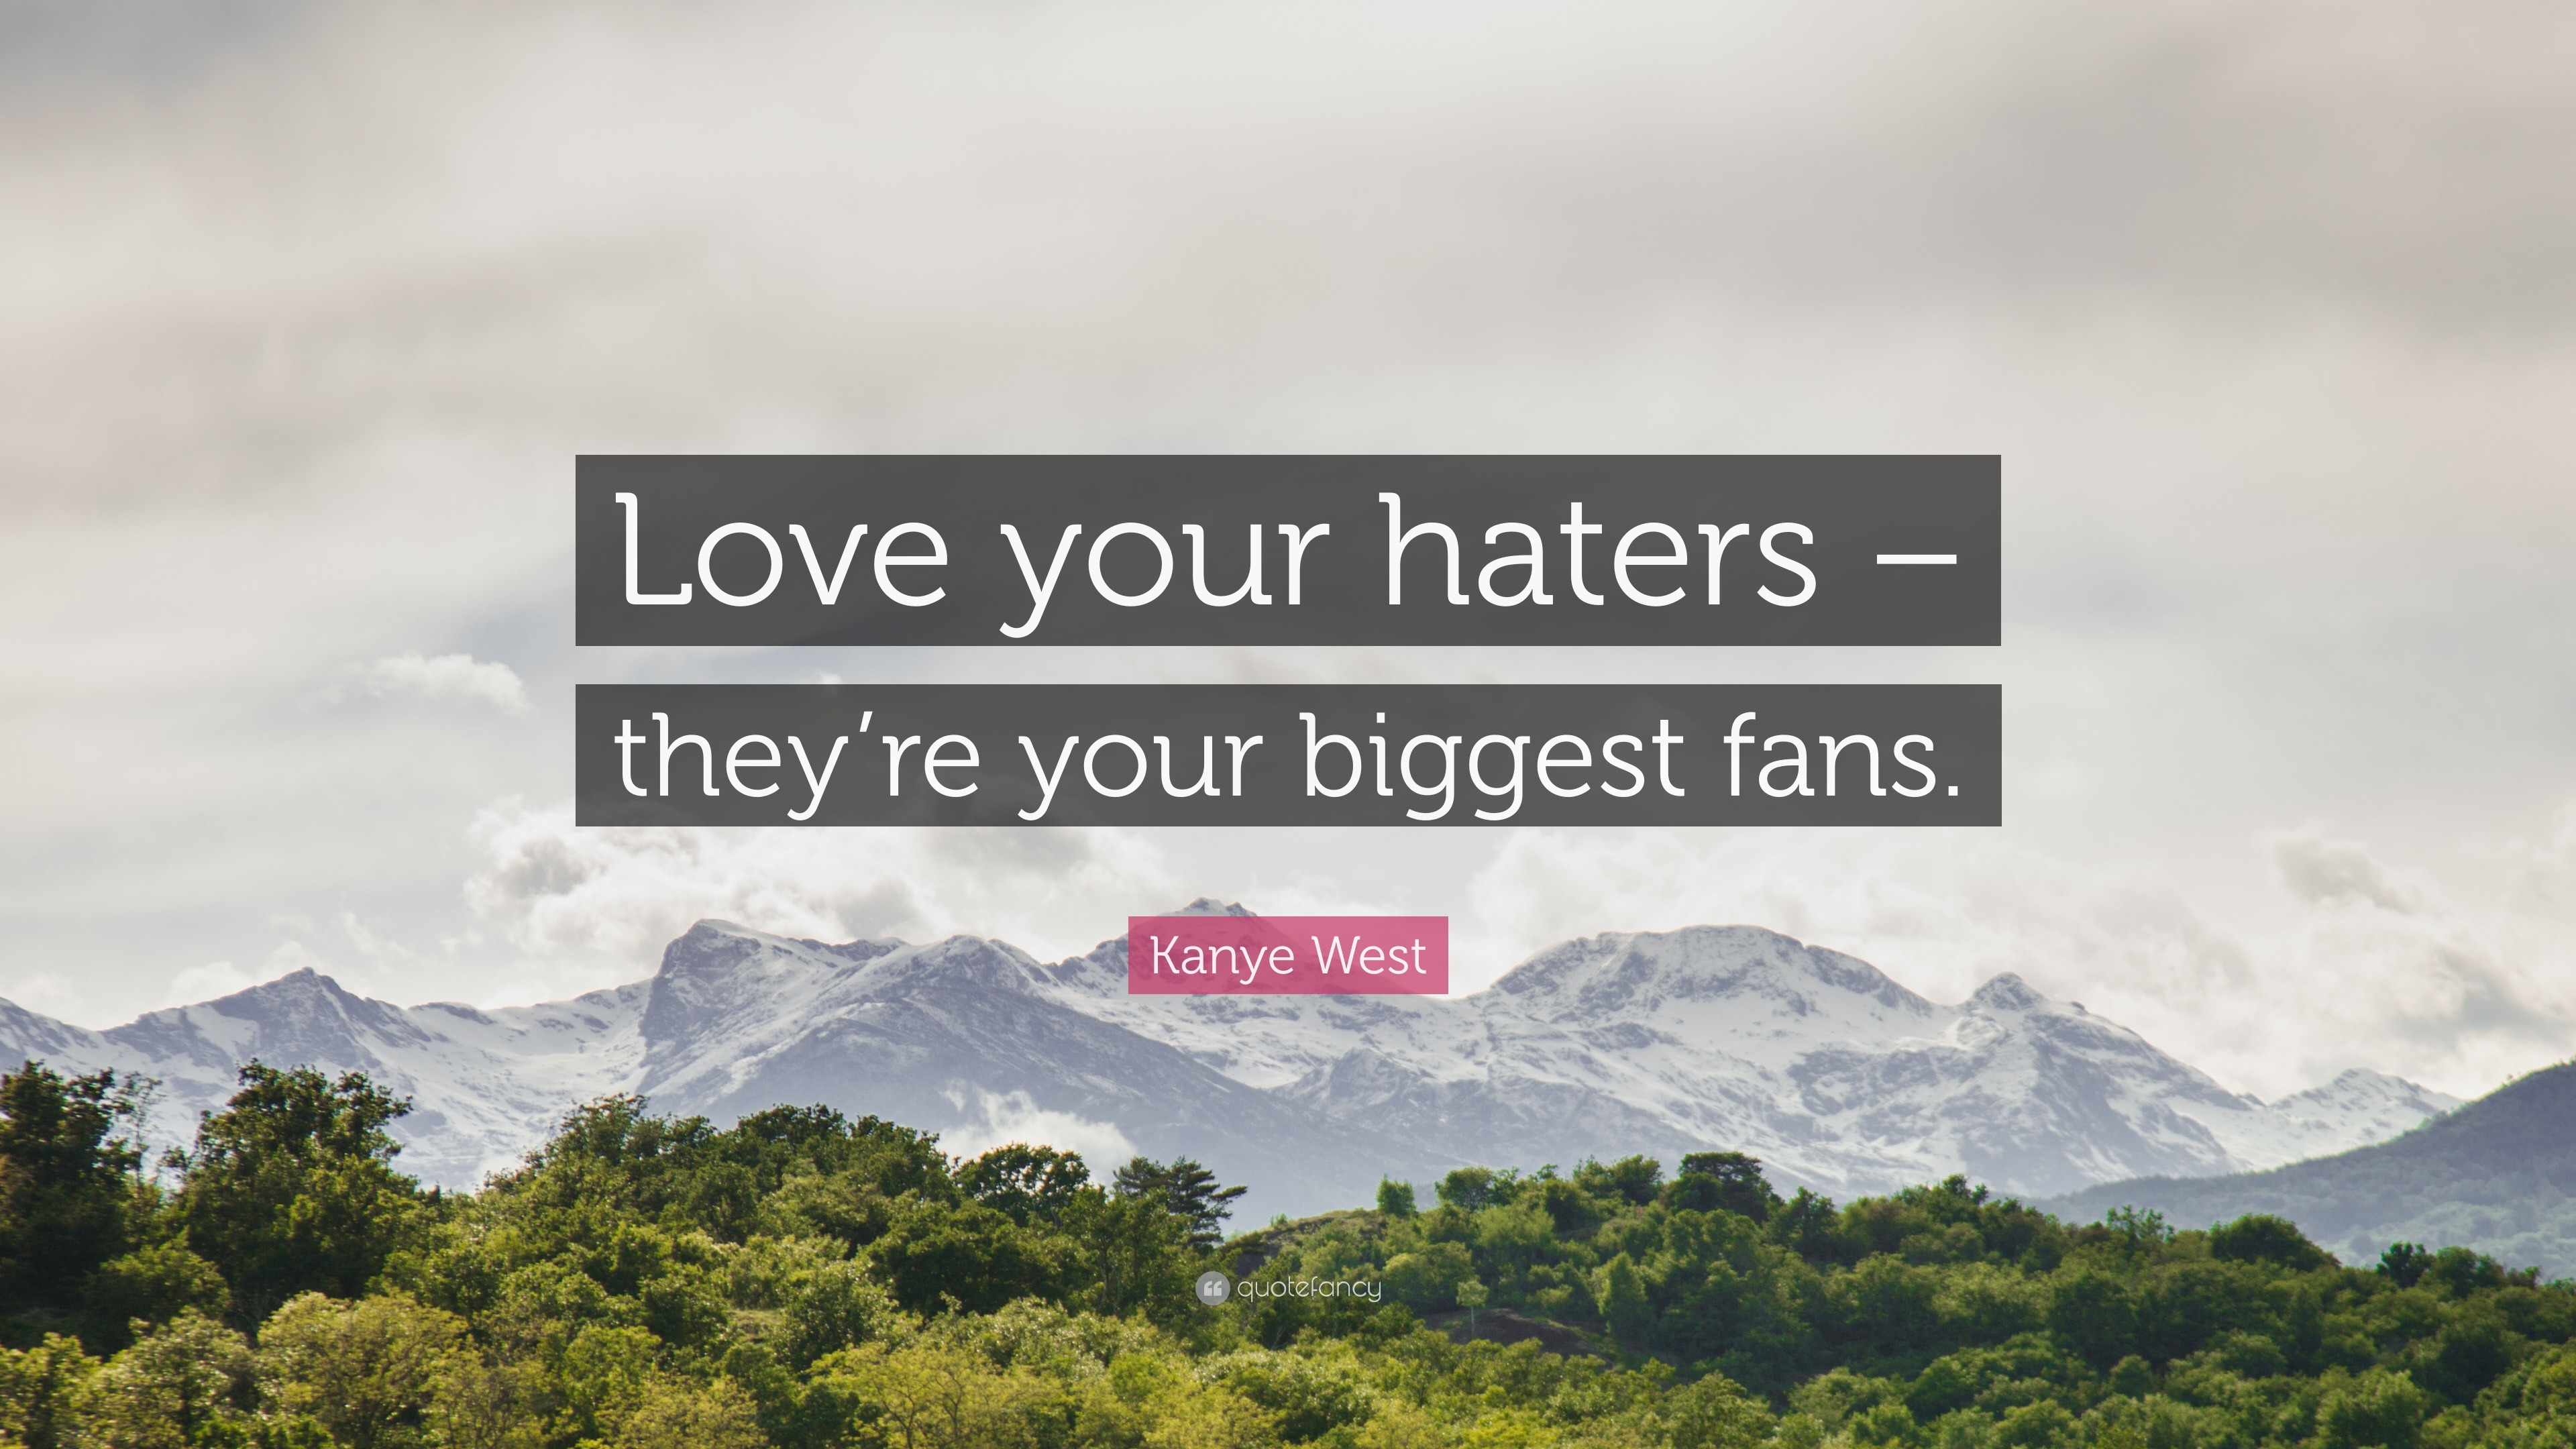 Kanye West Quote “Love your haters – they re your biggest fans